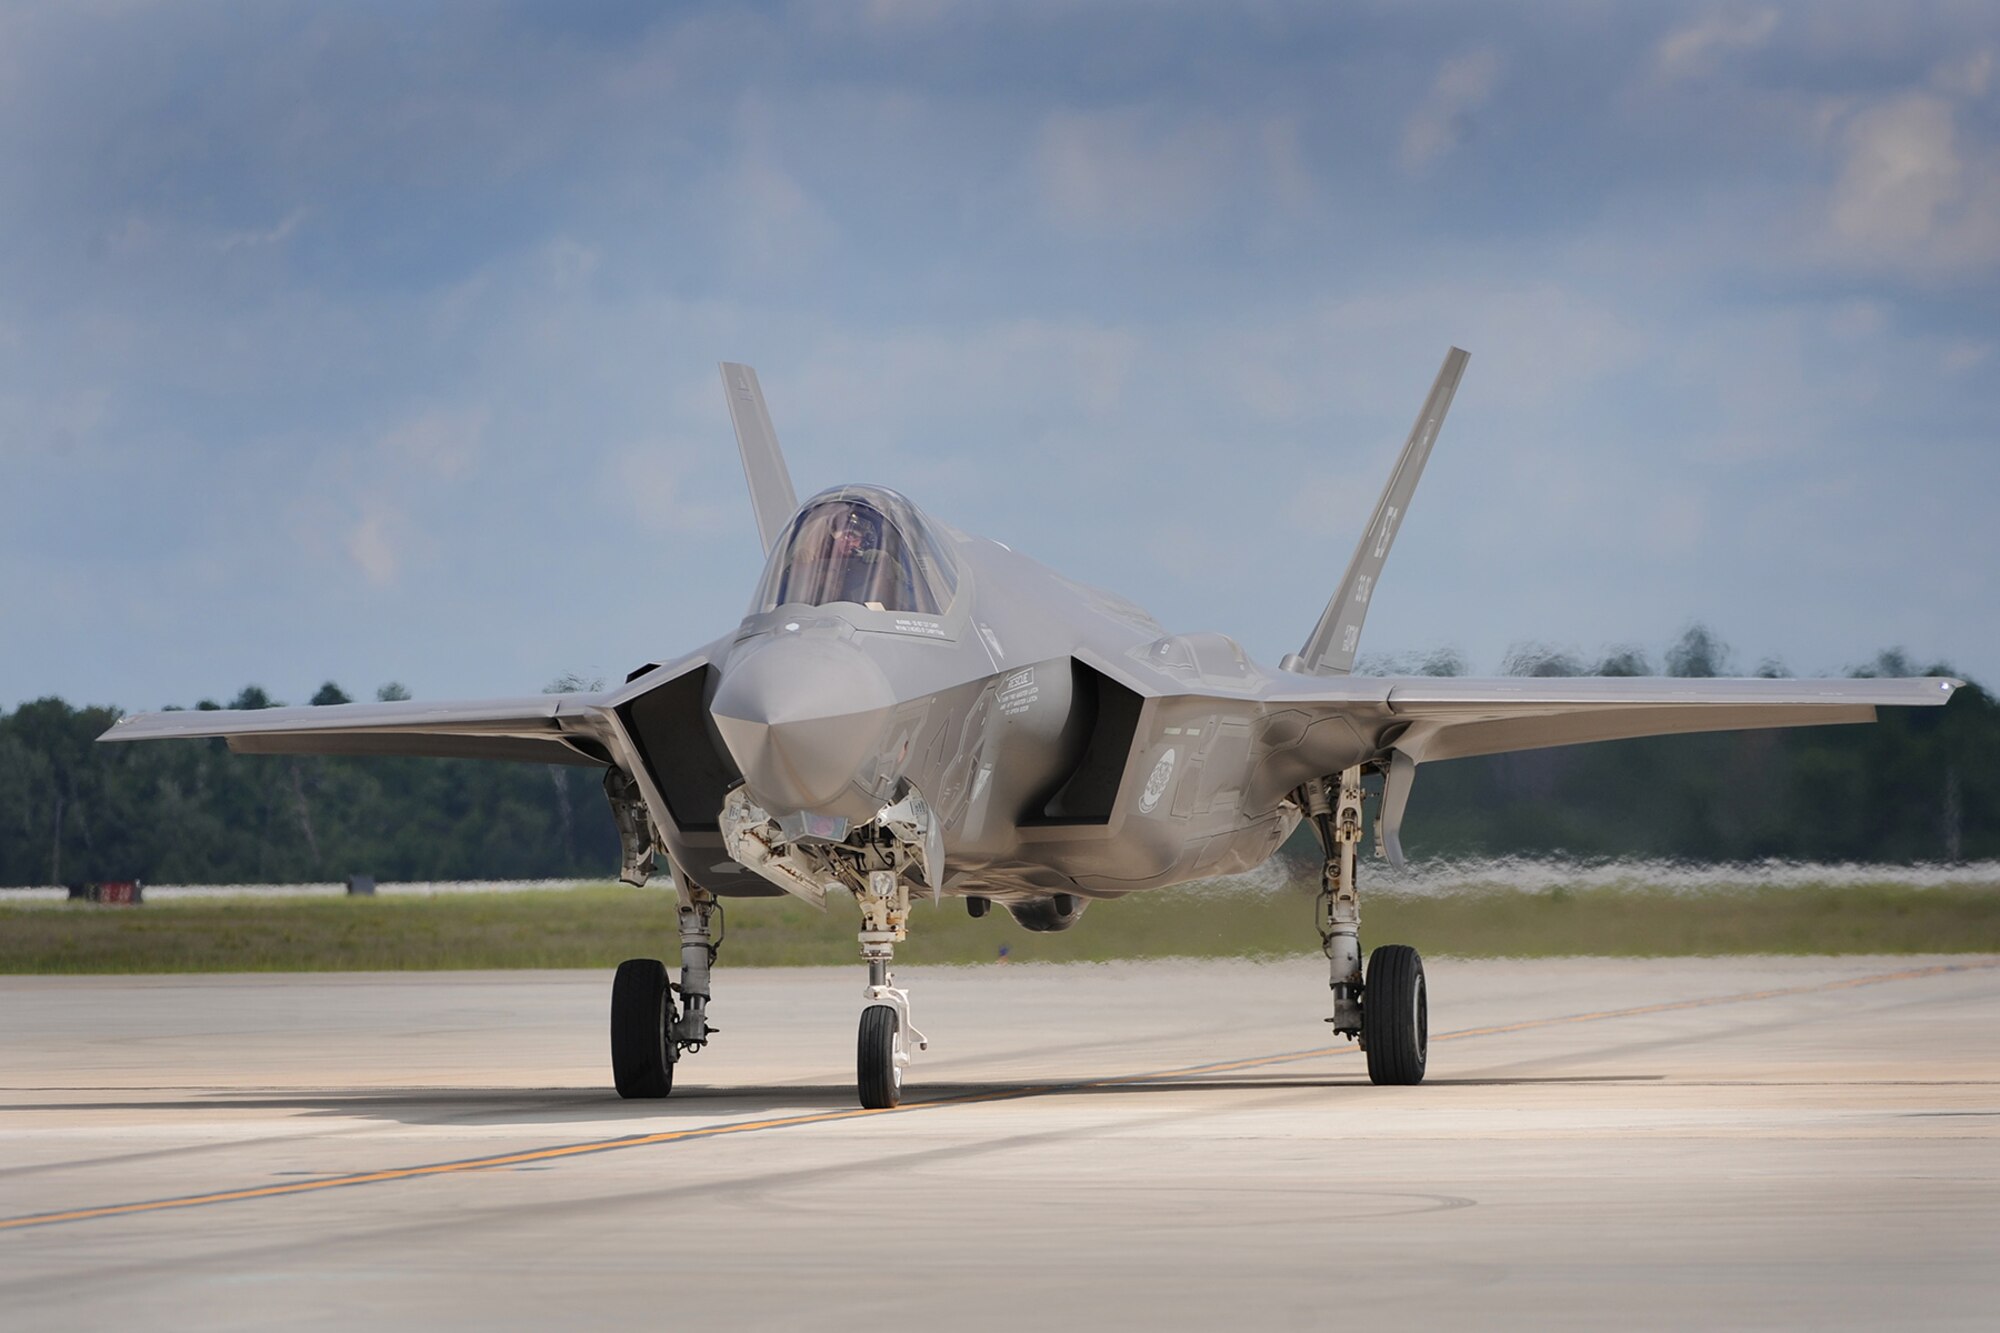 An Air Force  F-35 Lightning II taxies for take off during flight operations June 20, 2013, at Eglin Air Force Base, Fla. The F-35 will be used by the Air Force, Navy, Marine Corps and other partner nations.